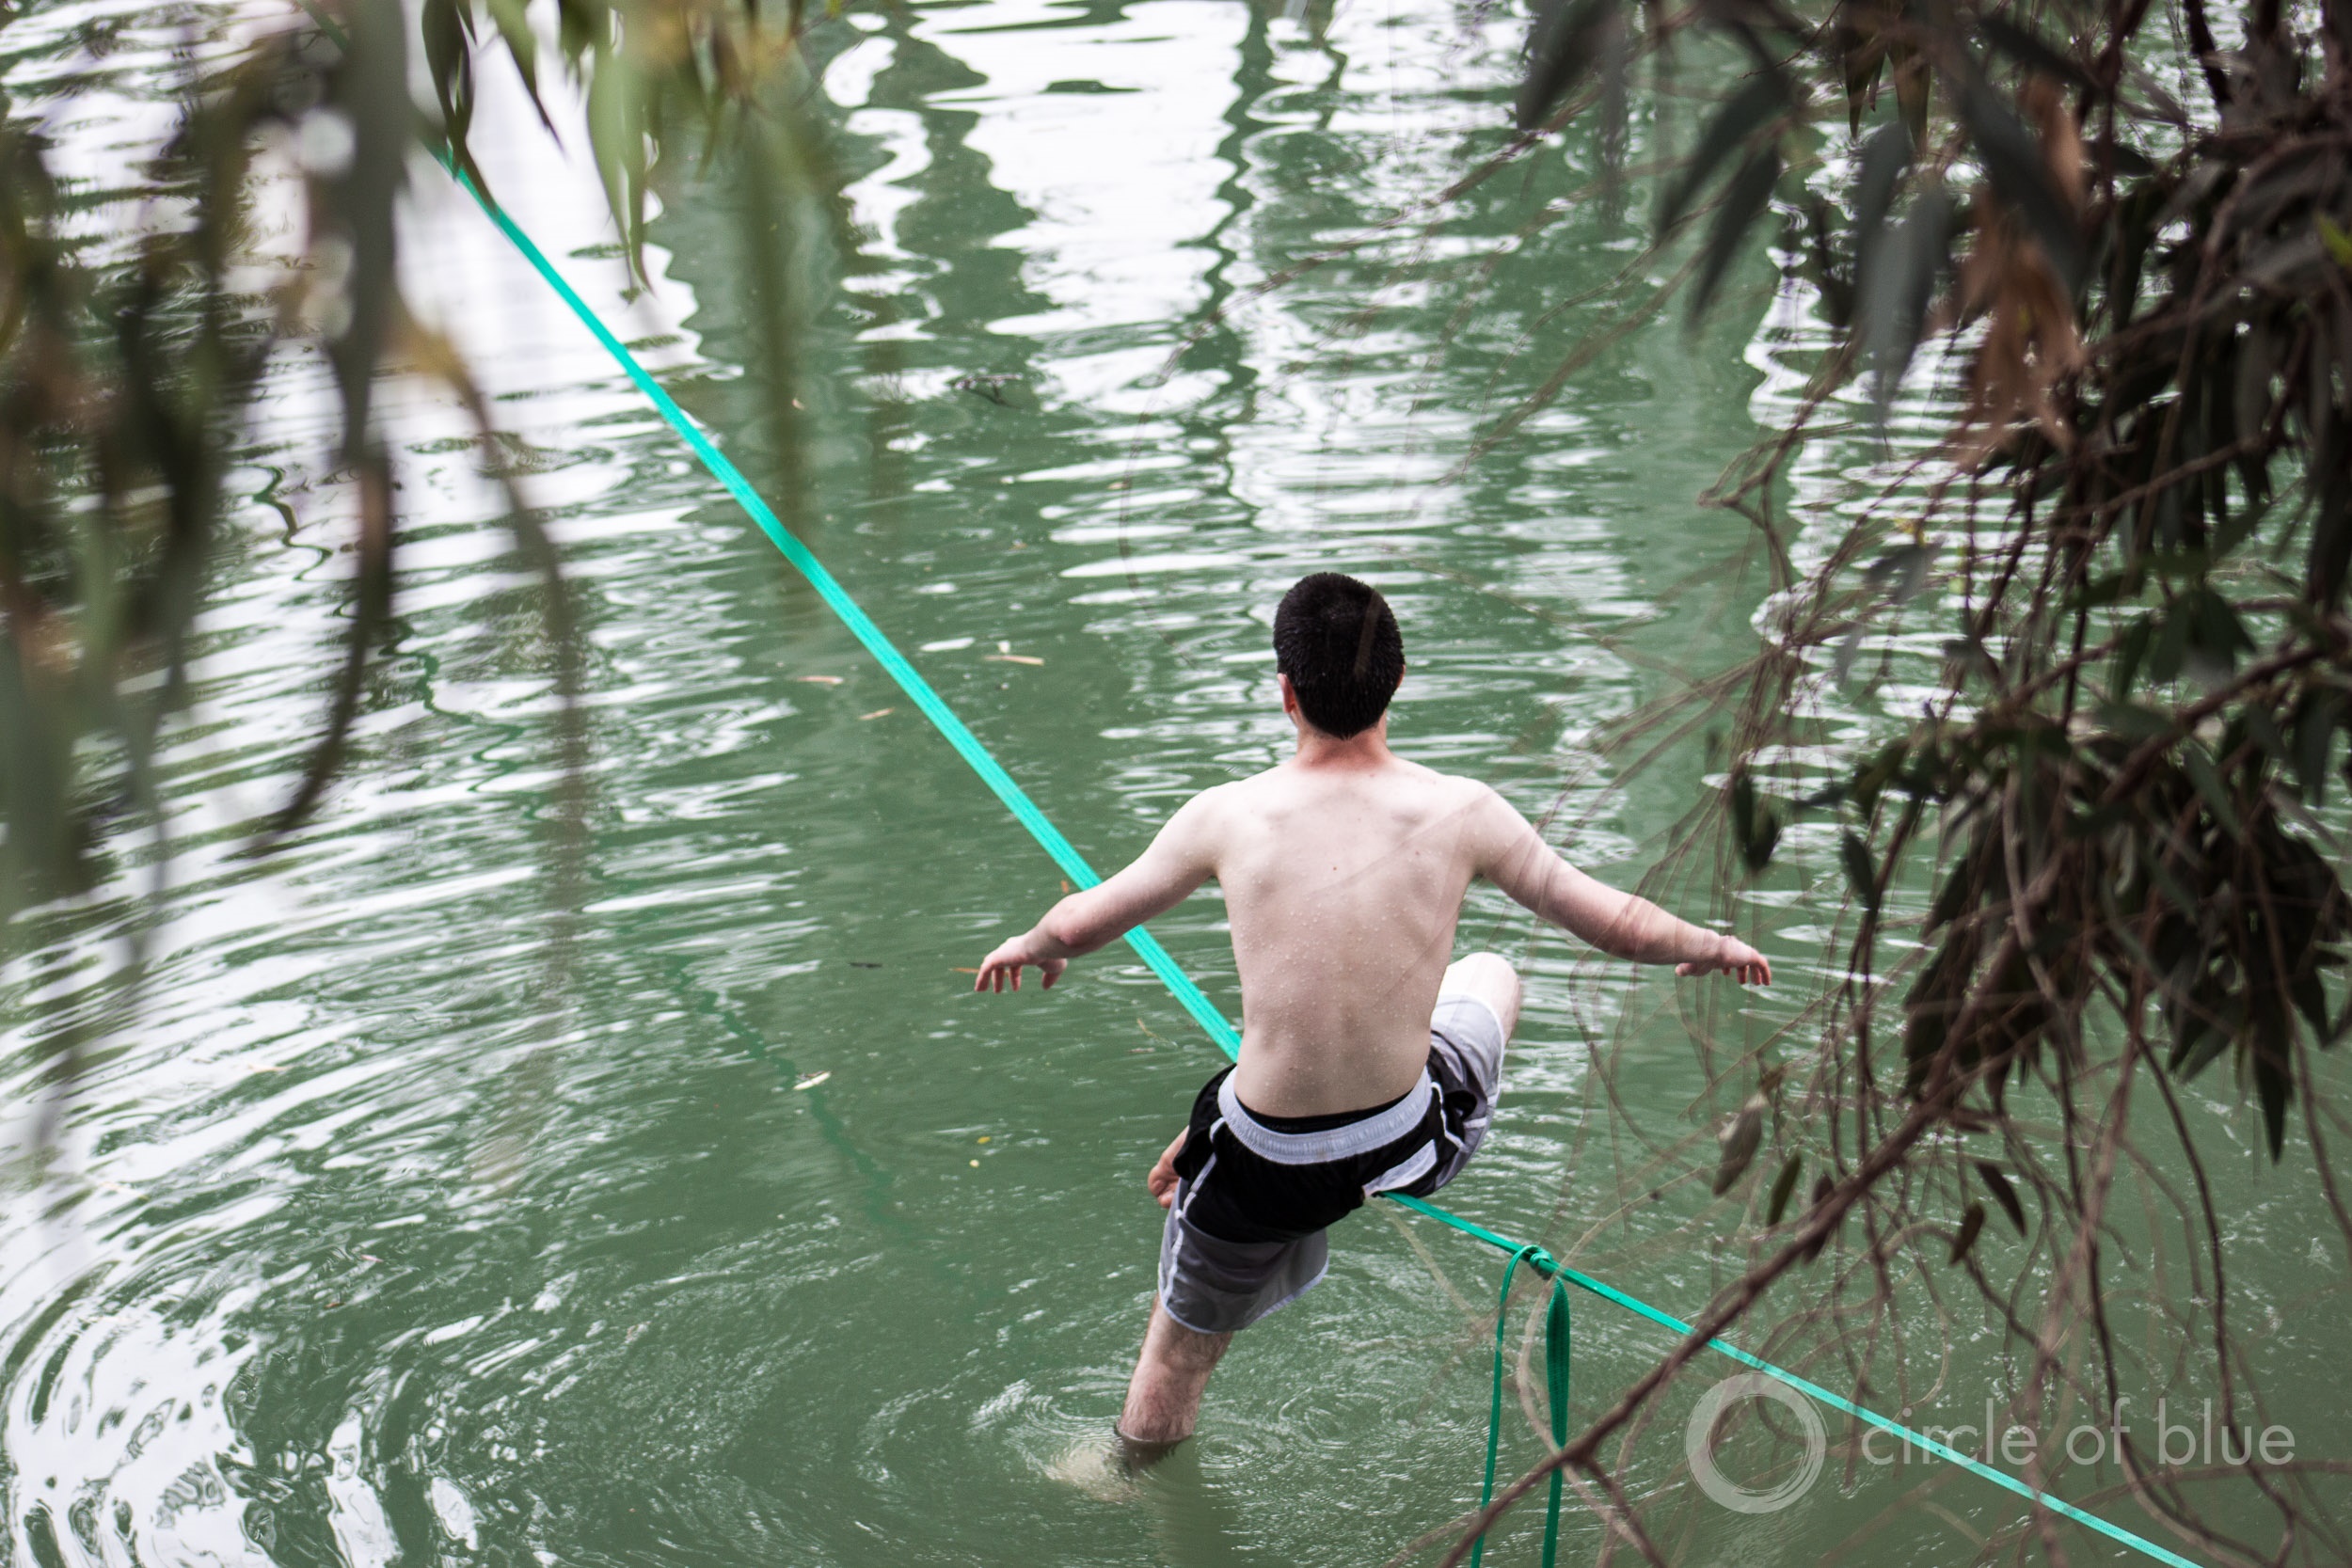 A teenager balances on a slack line looped between trees across the Jordan River, near Lake Kinneret. Though monumental in history and politics, the Jordan is not a large river. Photo © Brett Walton / Circle of Blue